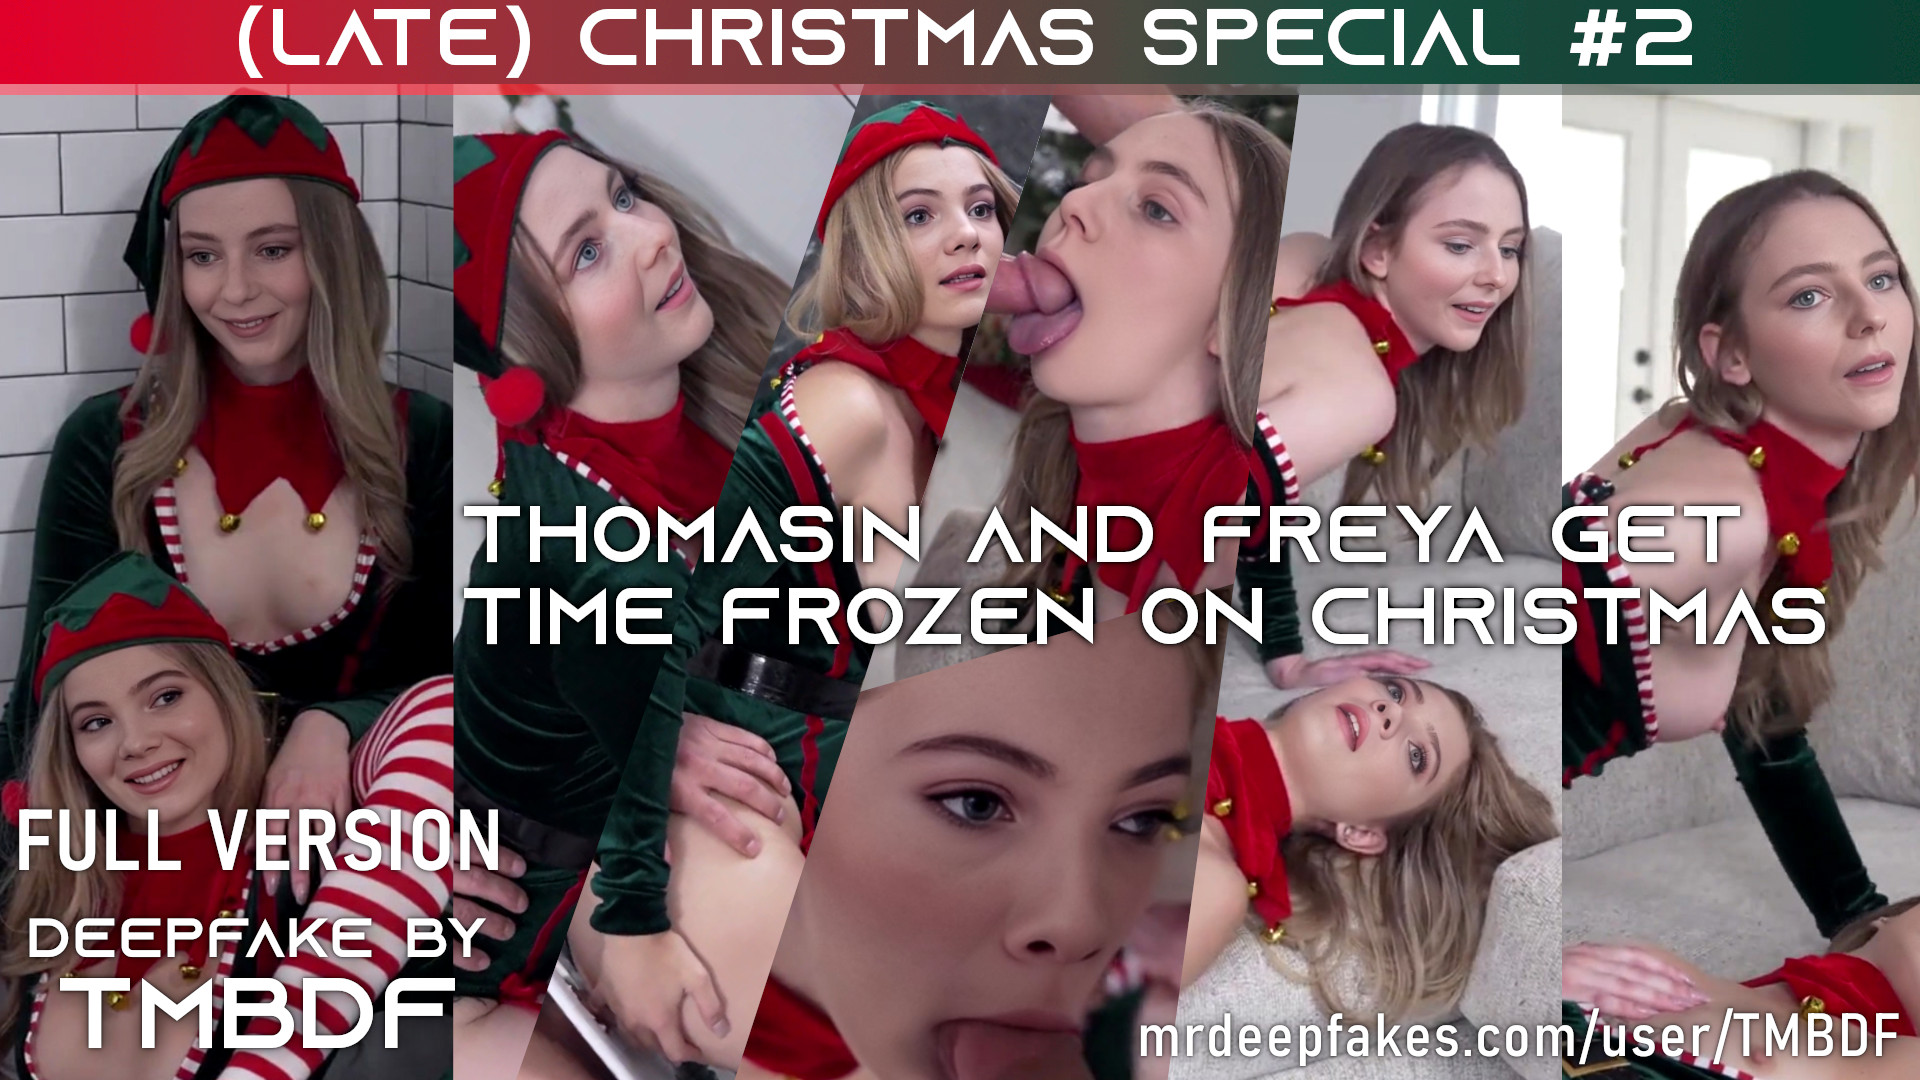 Threesome #9 - Thomasin and Freya - Christmas Special - FULL VERSION